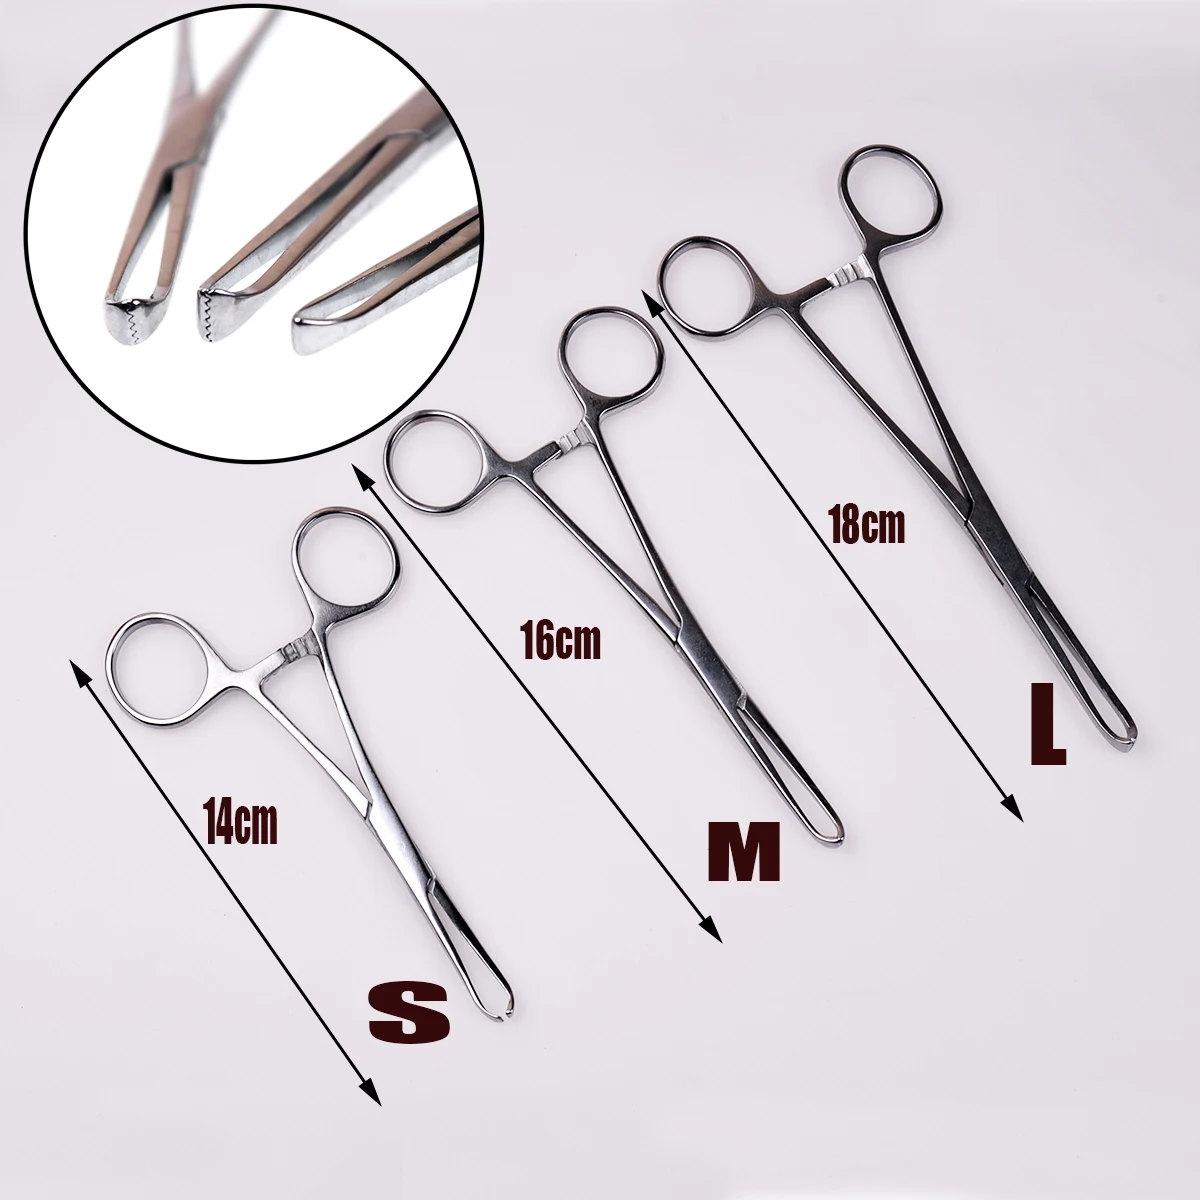 Alice Tissue Forceps Clamps Pliers Pet Orthopaedic Surgical Instruments Tissue Forceps Cervical Forceps Uterine Forceps